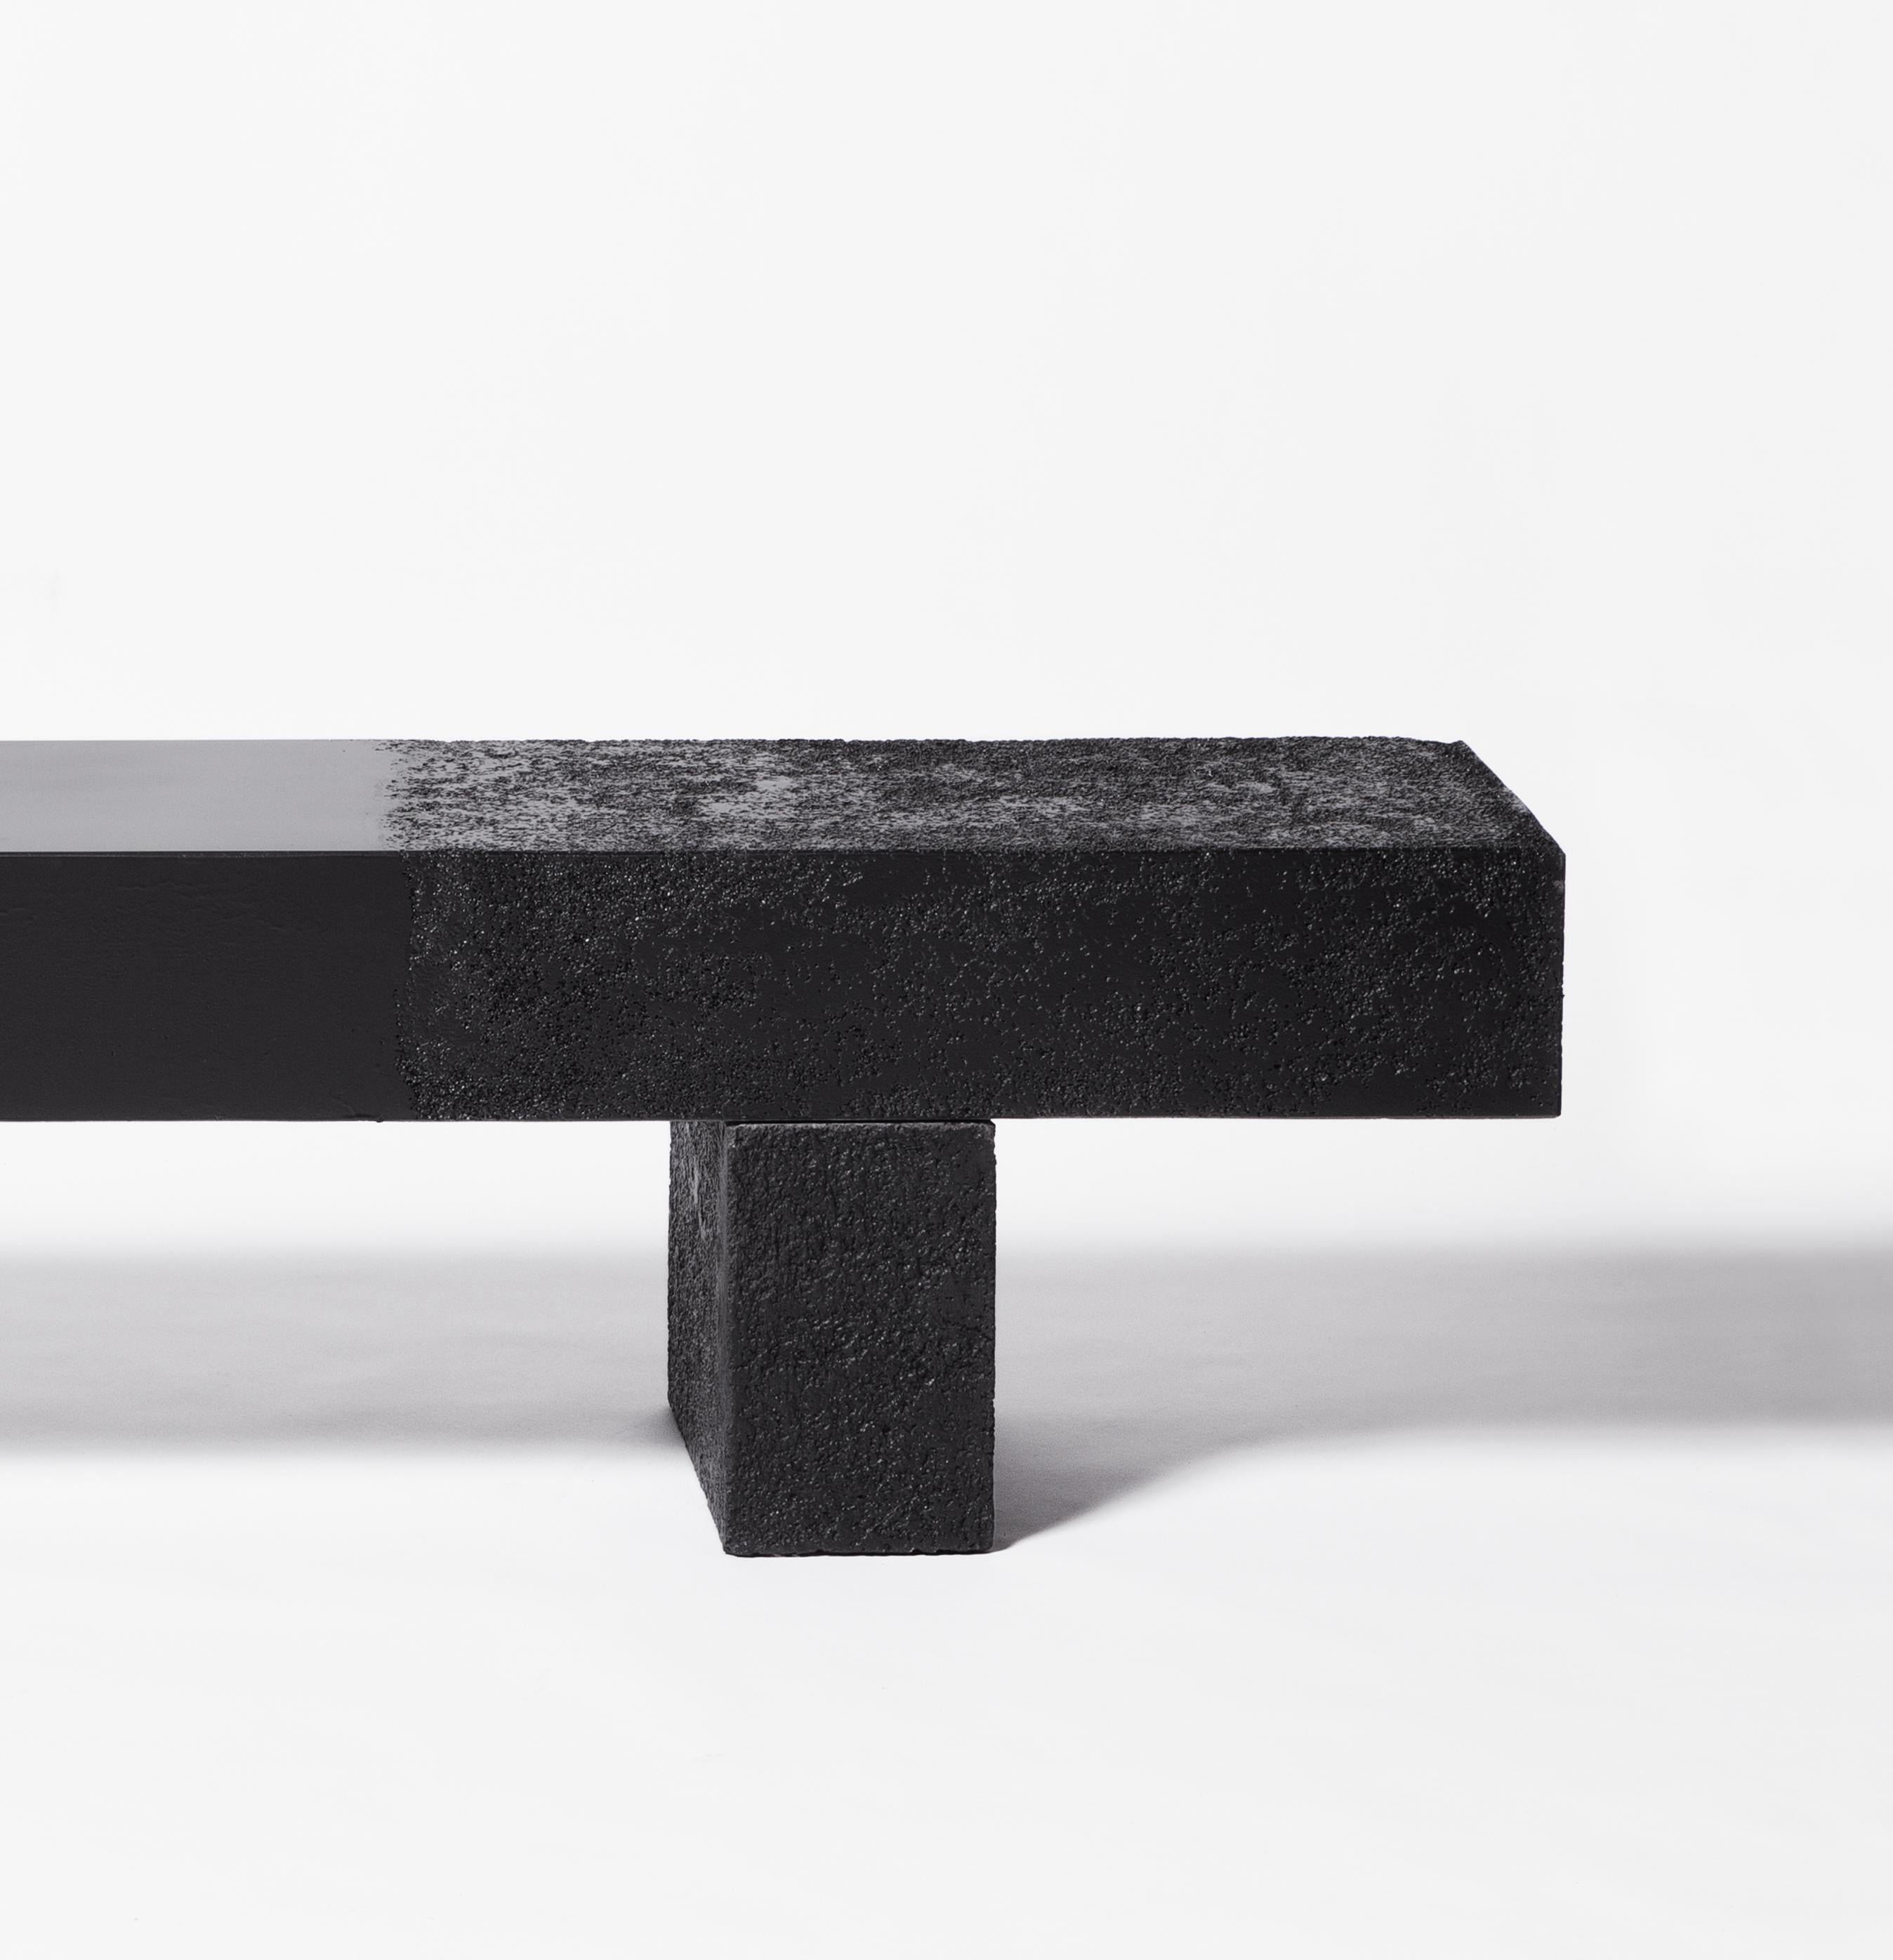 Transparency Matters collection by Draga & Aurel:
Bench in concrete with details obtained through a technique involving the corrosion of sea salt. Hand finished brass leg.
The bench is perfect indoor as well as outdoor.
Size: Depth 40, width 210,